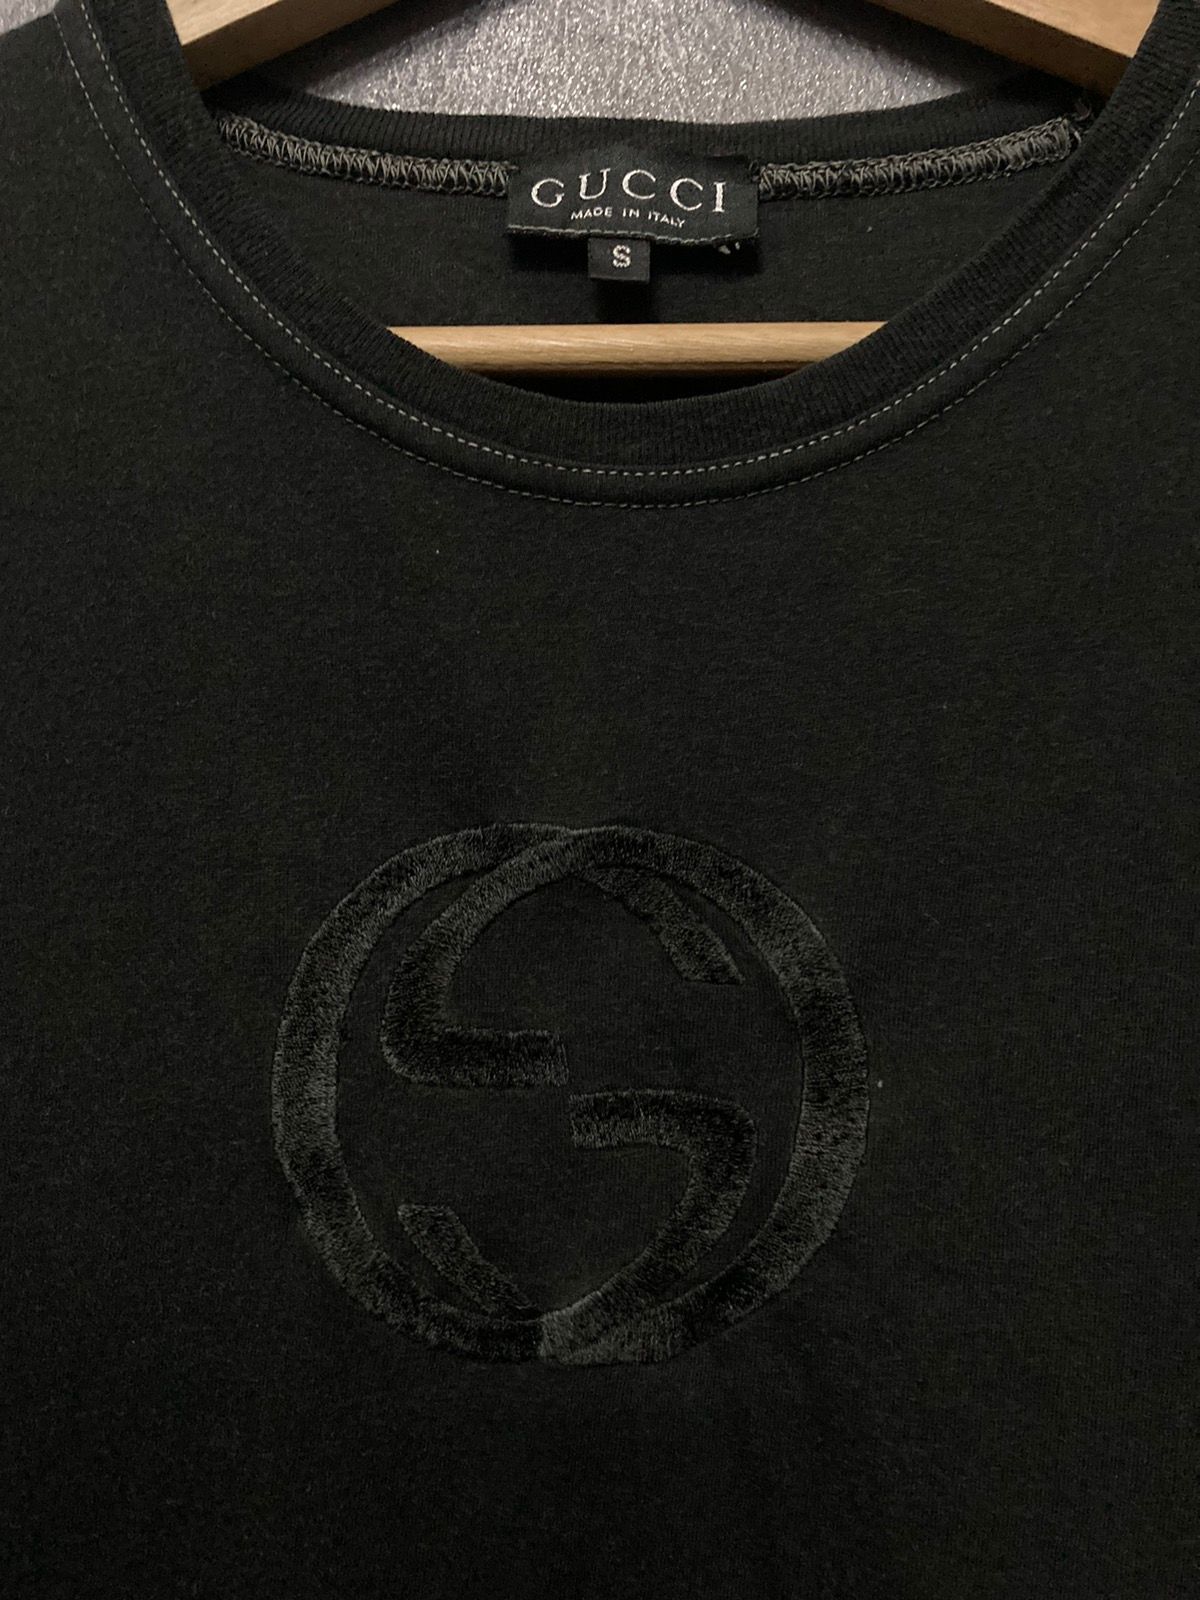 Gucci Embroidery Big Logo Shirt Made in Italy - 3